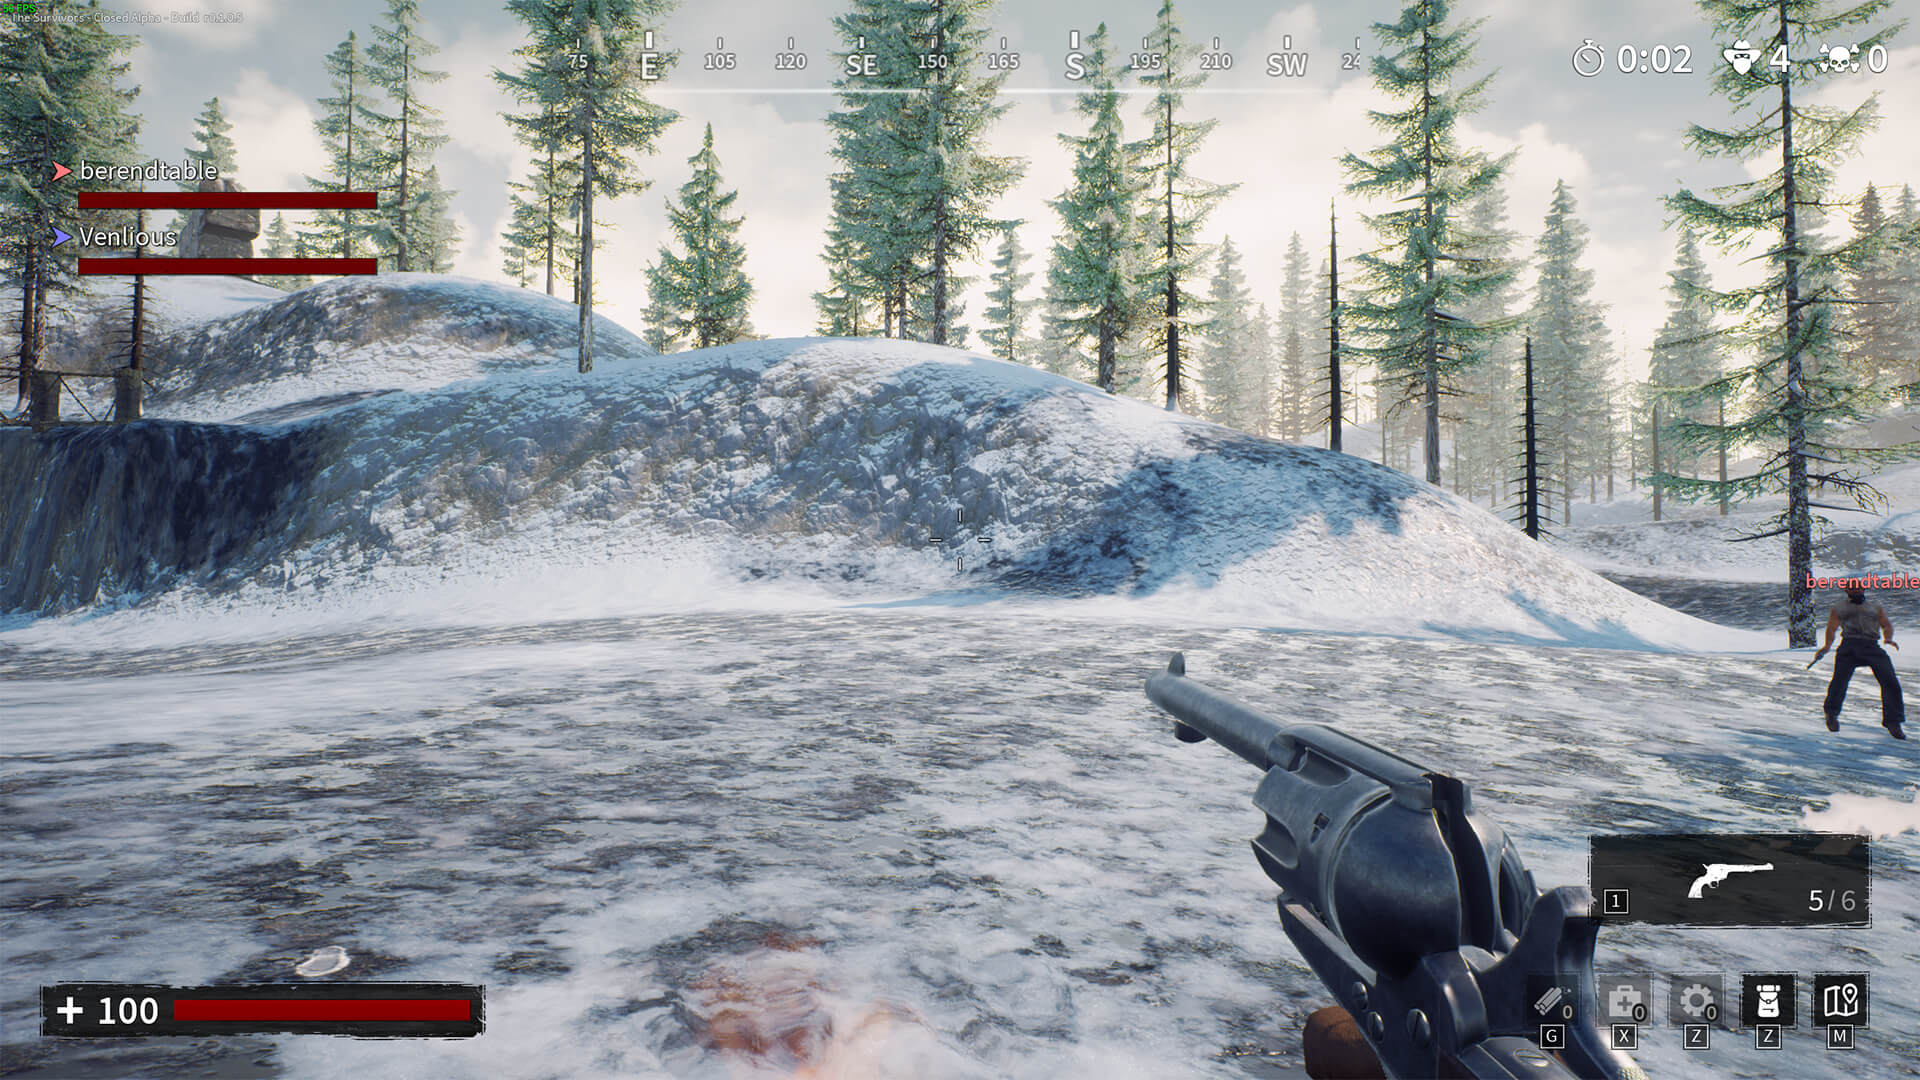 The HUD is seen as it is in the game as of July 2018.